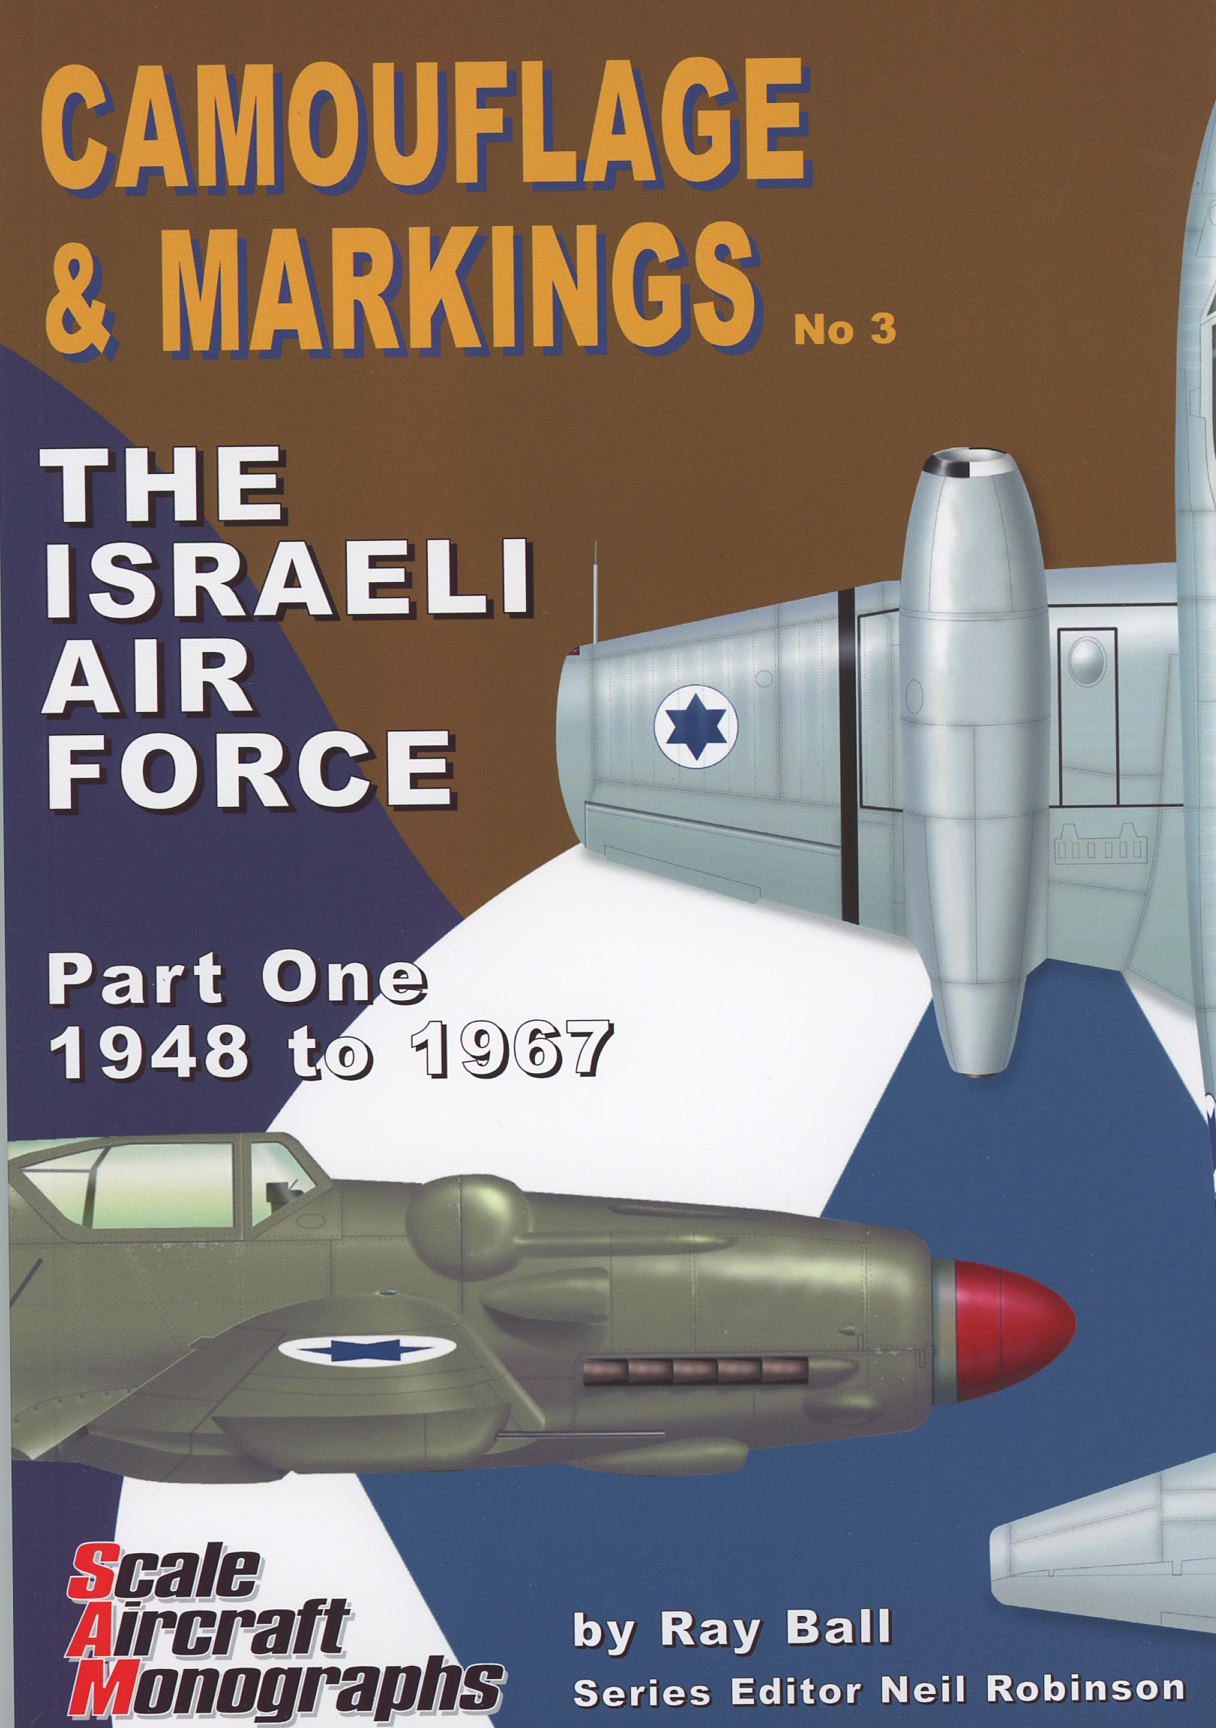 Guideline Publications Camouflage & Markings 3: The Israeli Air Force Part one 1948-1967 